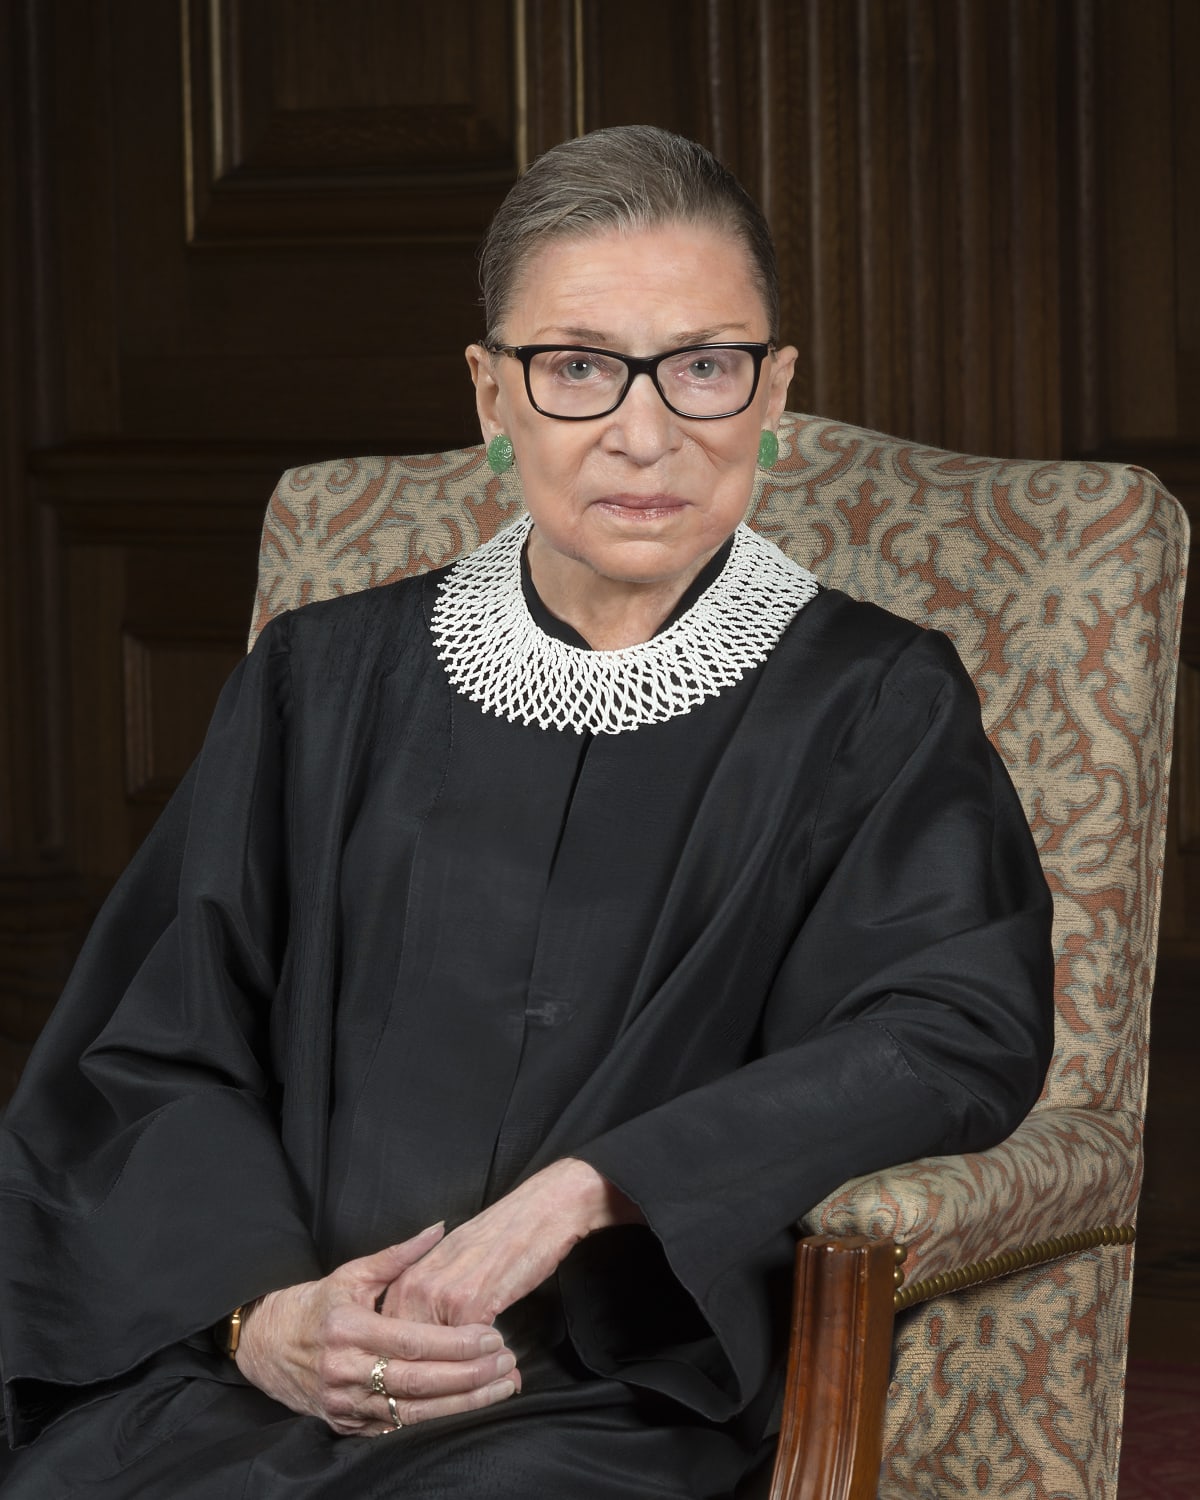 What Law Students Should Know About the Ruth Bader Ginsburg Effect